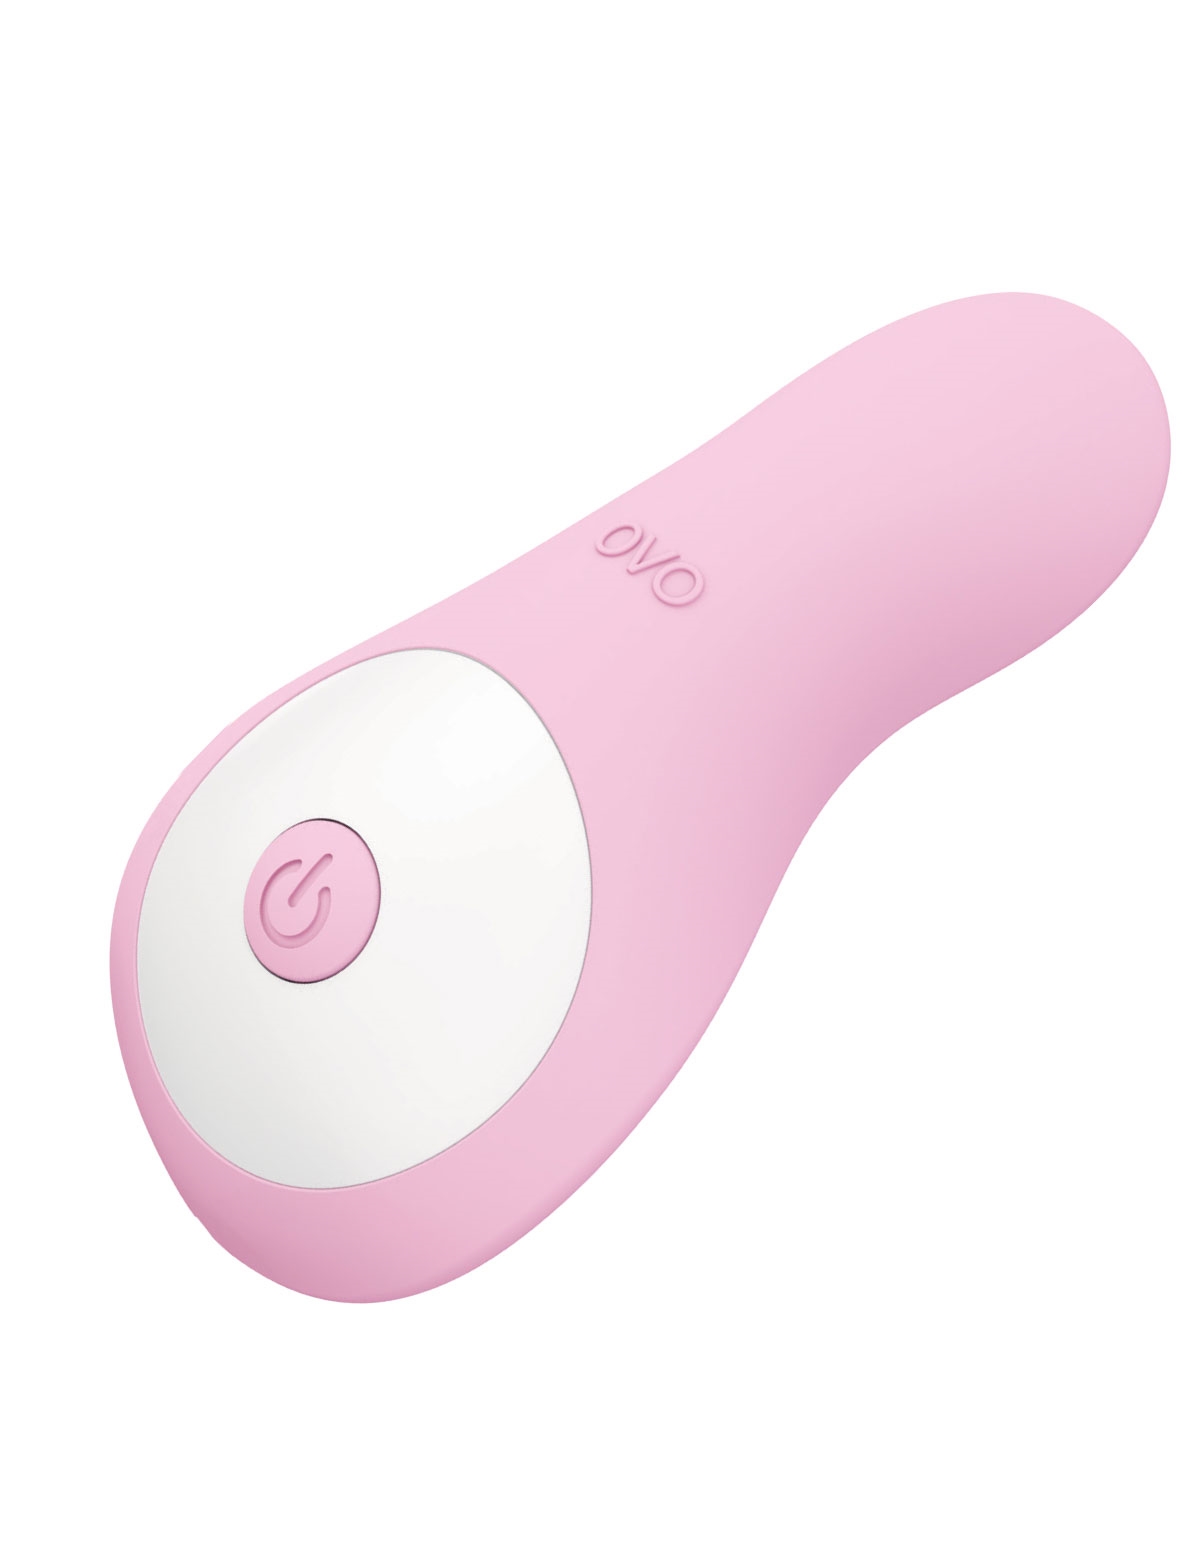 alternate image for Ovo S5 Rechargeable Lay On Vibrator